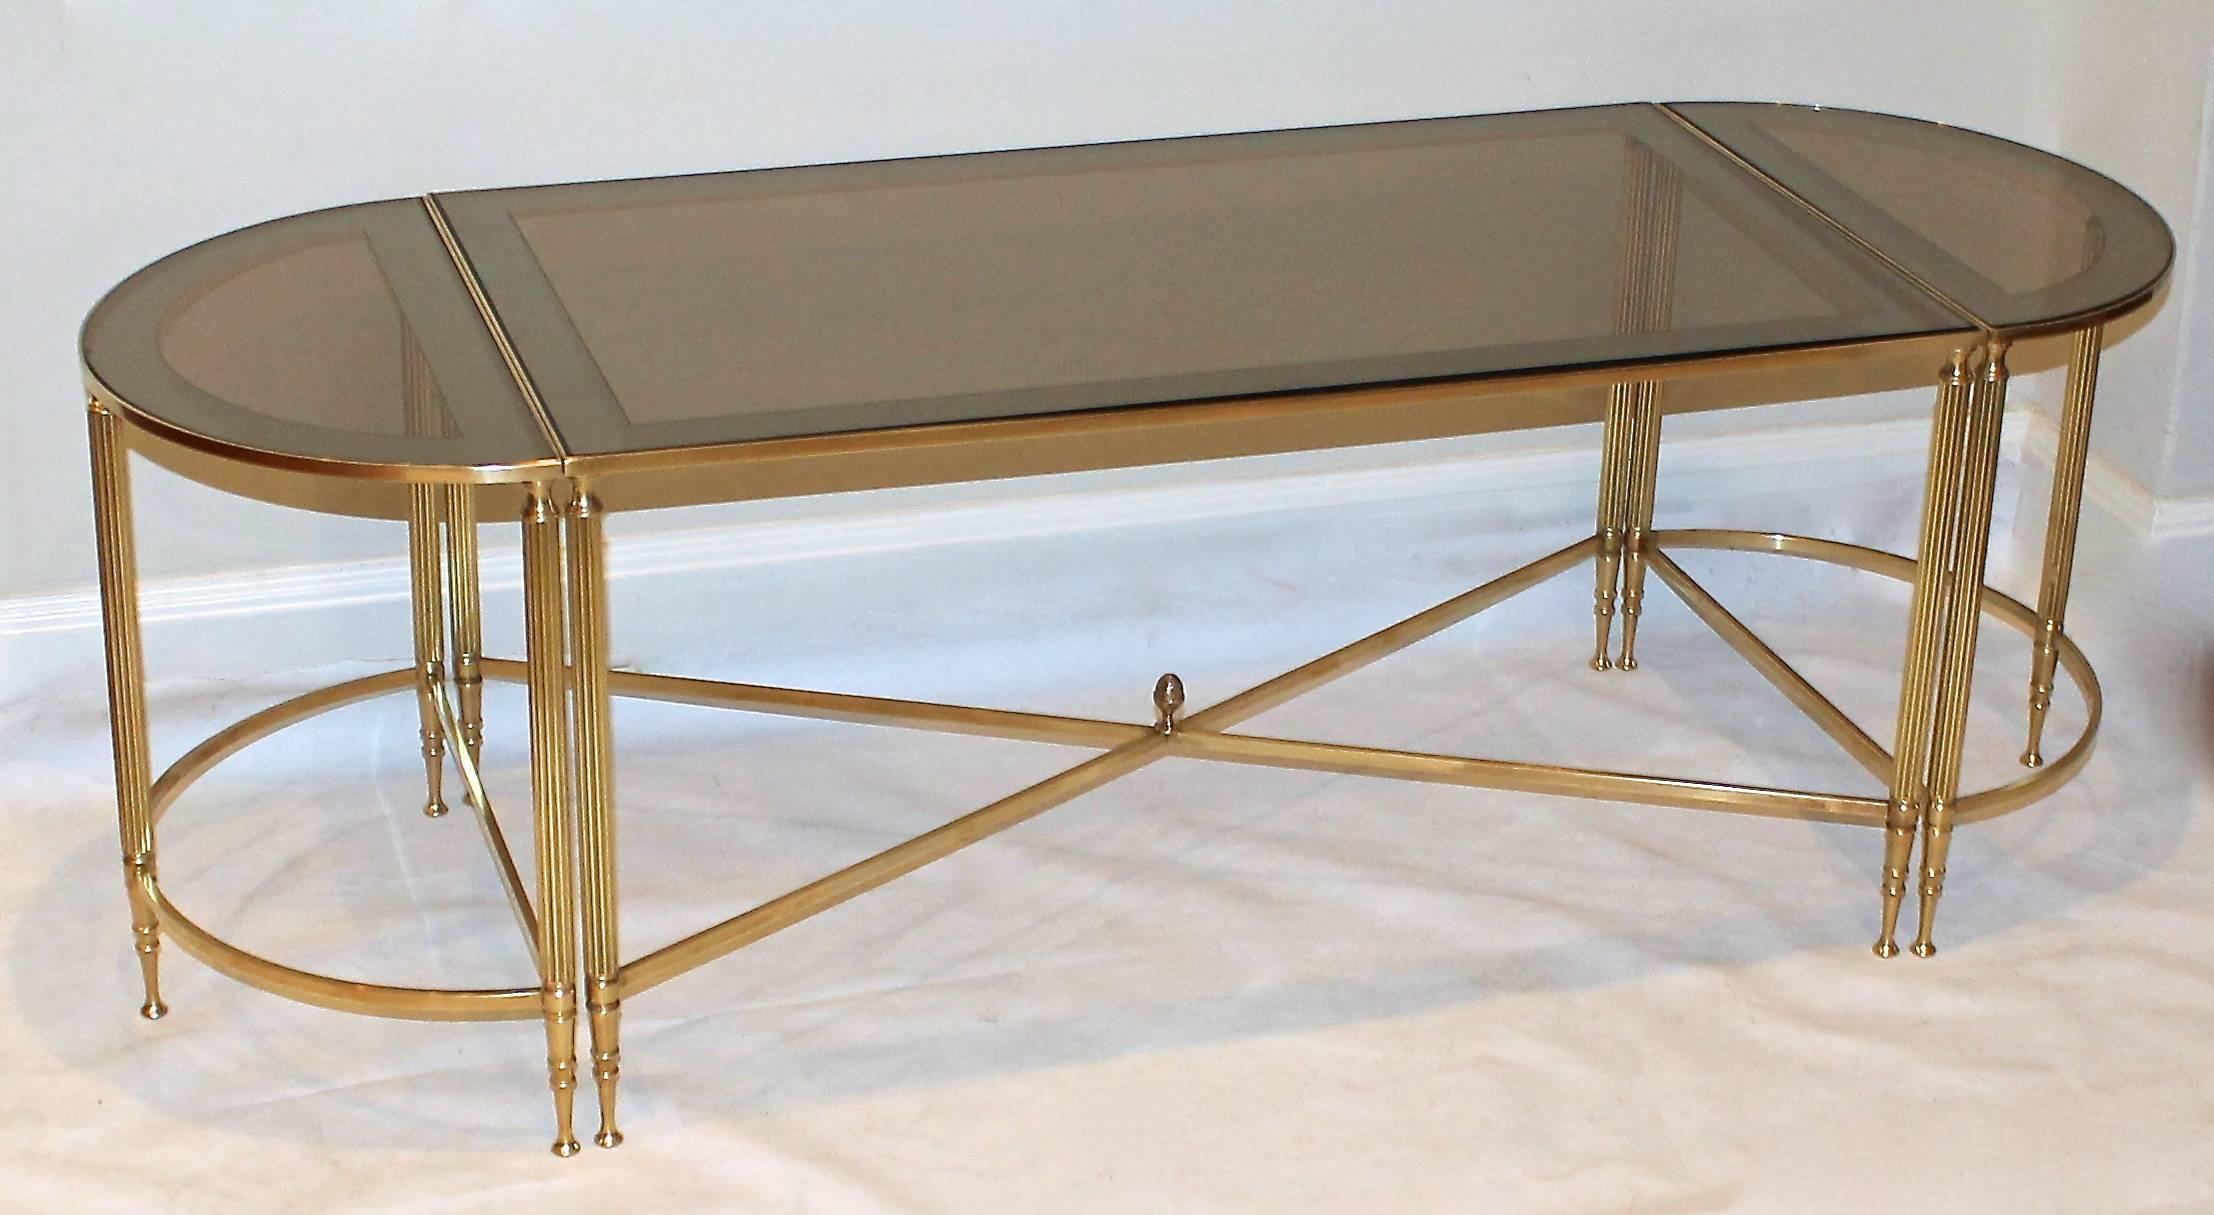 Mid-20th Century French Jansen Style Three-Piece Brass Cocktail Table For Sale